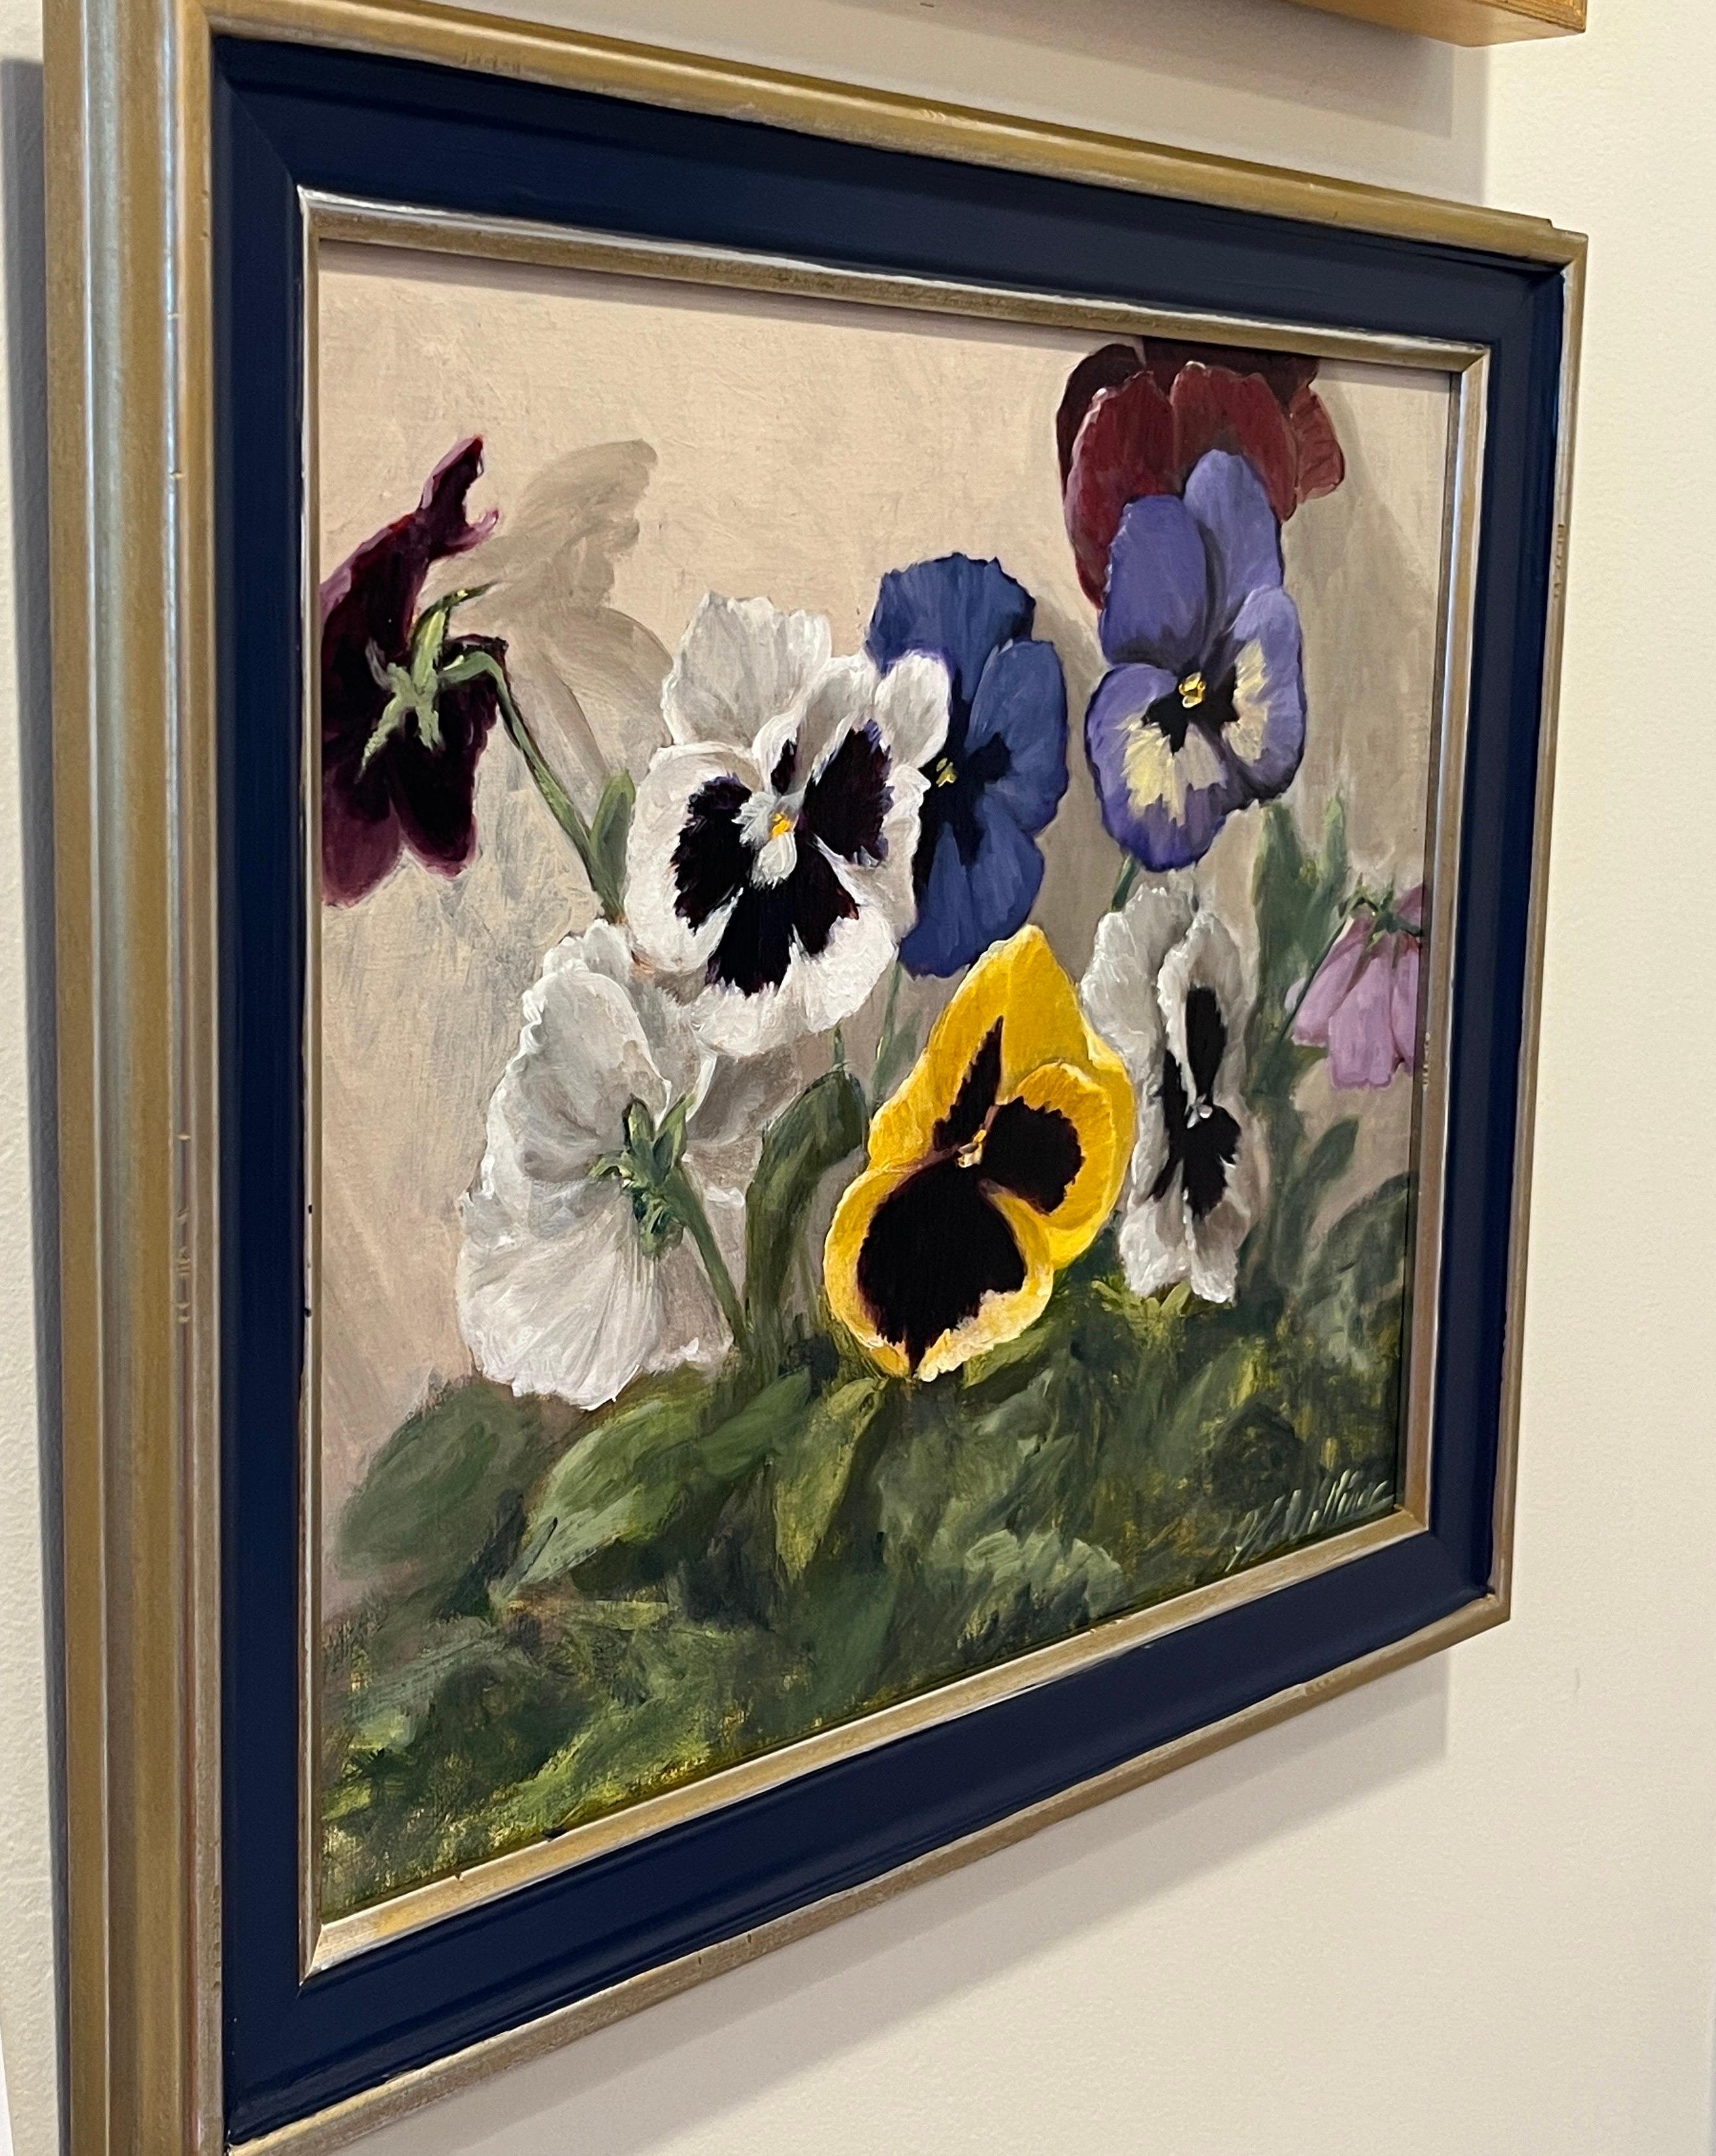 This piece is an original oil painting on linen panel. It's overall framed dimensions are 16x18 inches.

GC Williams has a degree in art history which gave her an understanding of, and appreciation for, not only the art of the past, but the